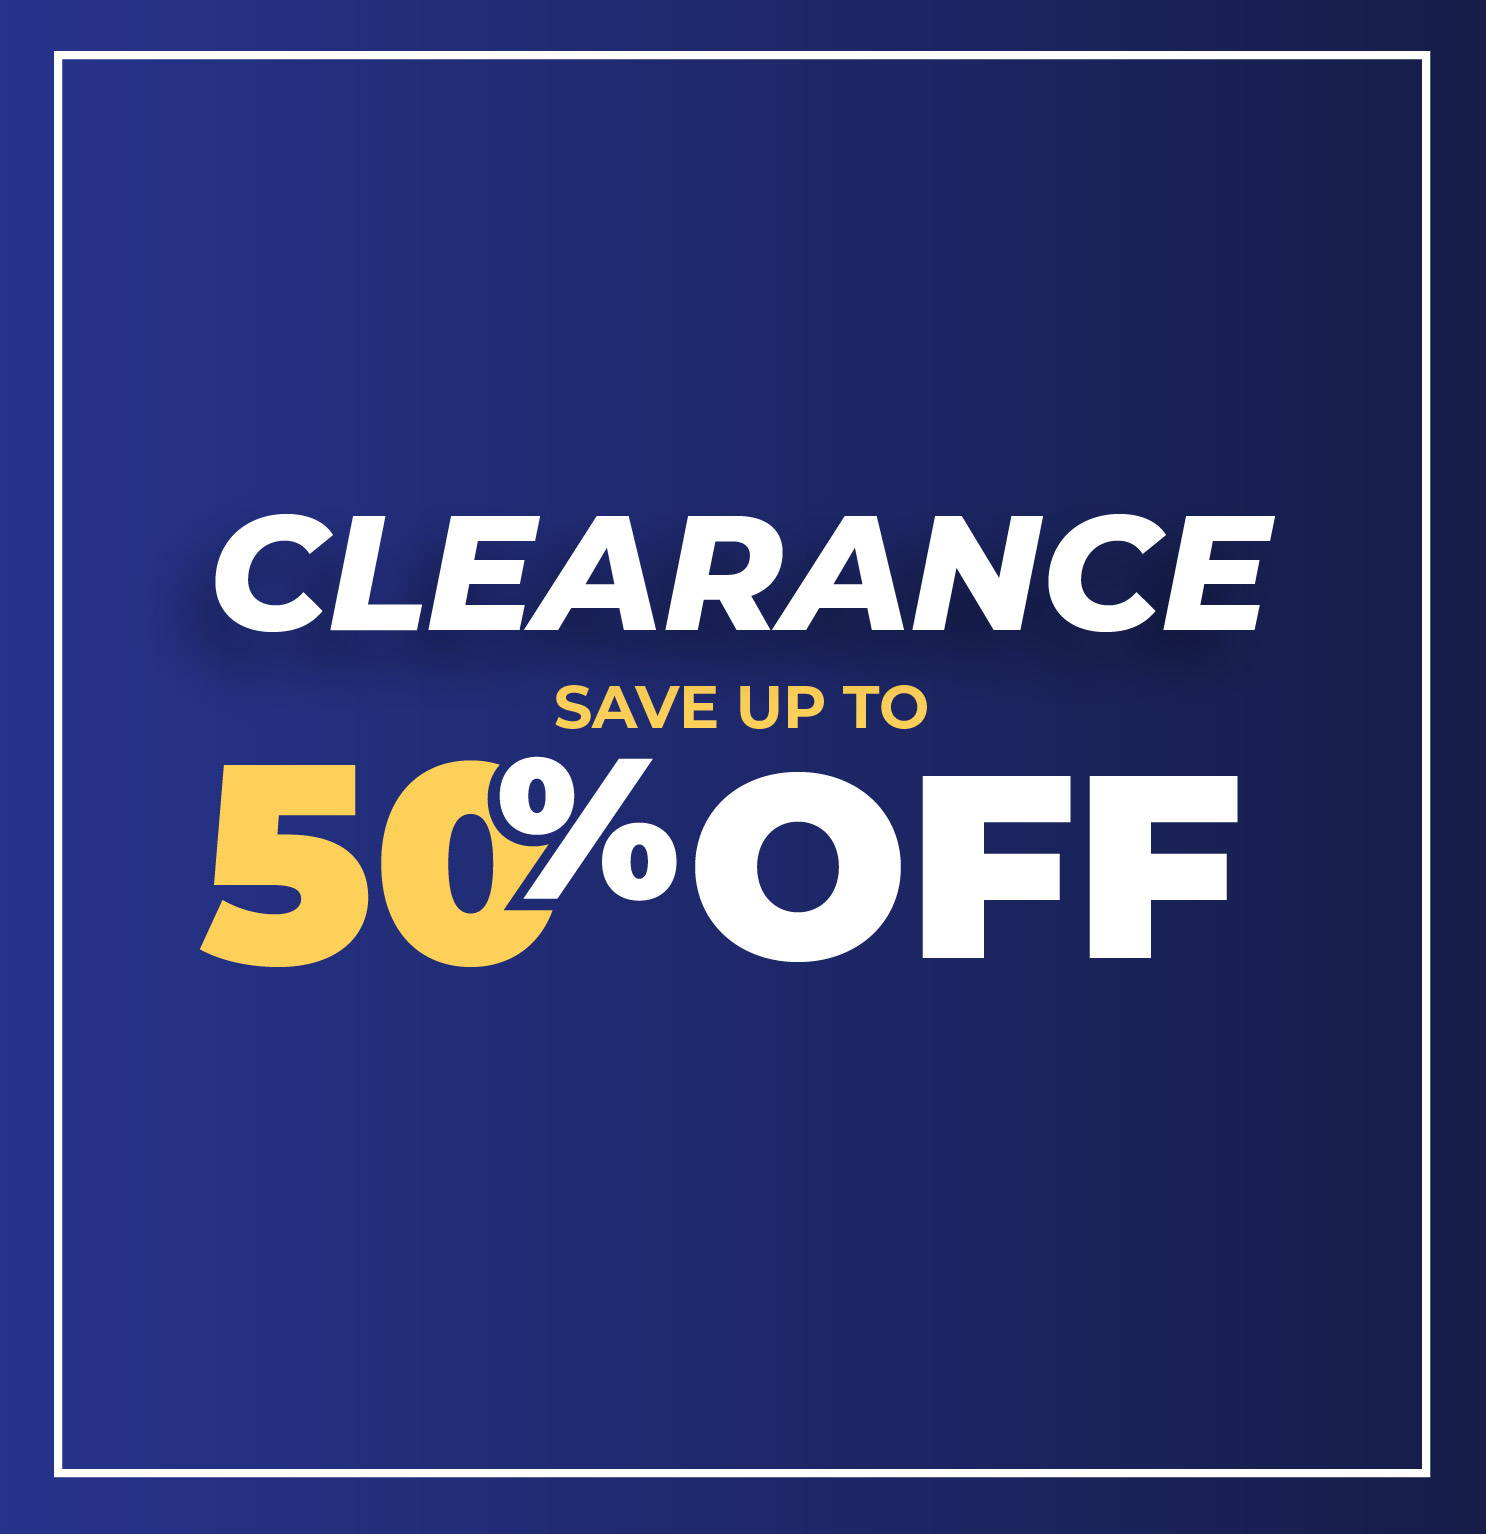 Holliday clearance, Up to 80% off, shop clearance button sends you to the clearance collection page.